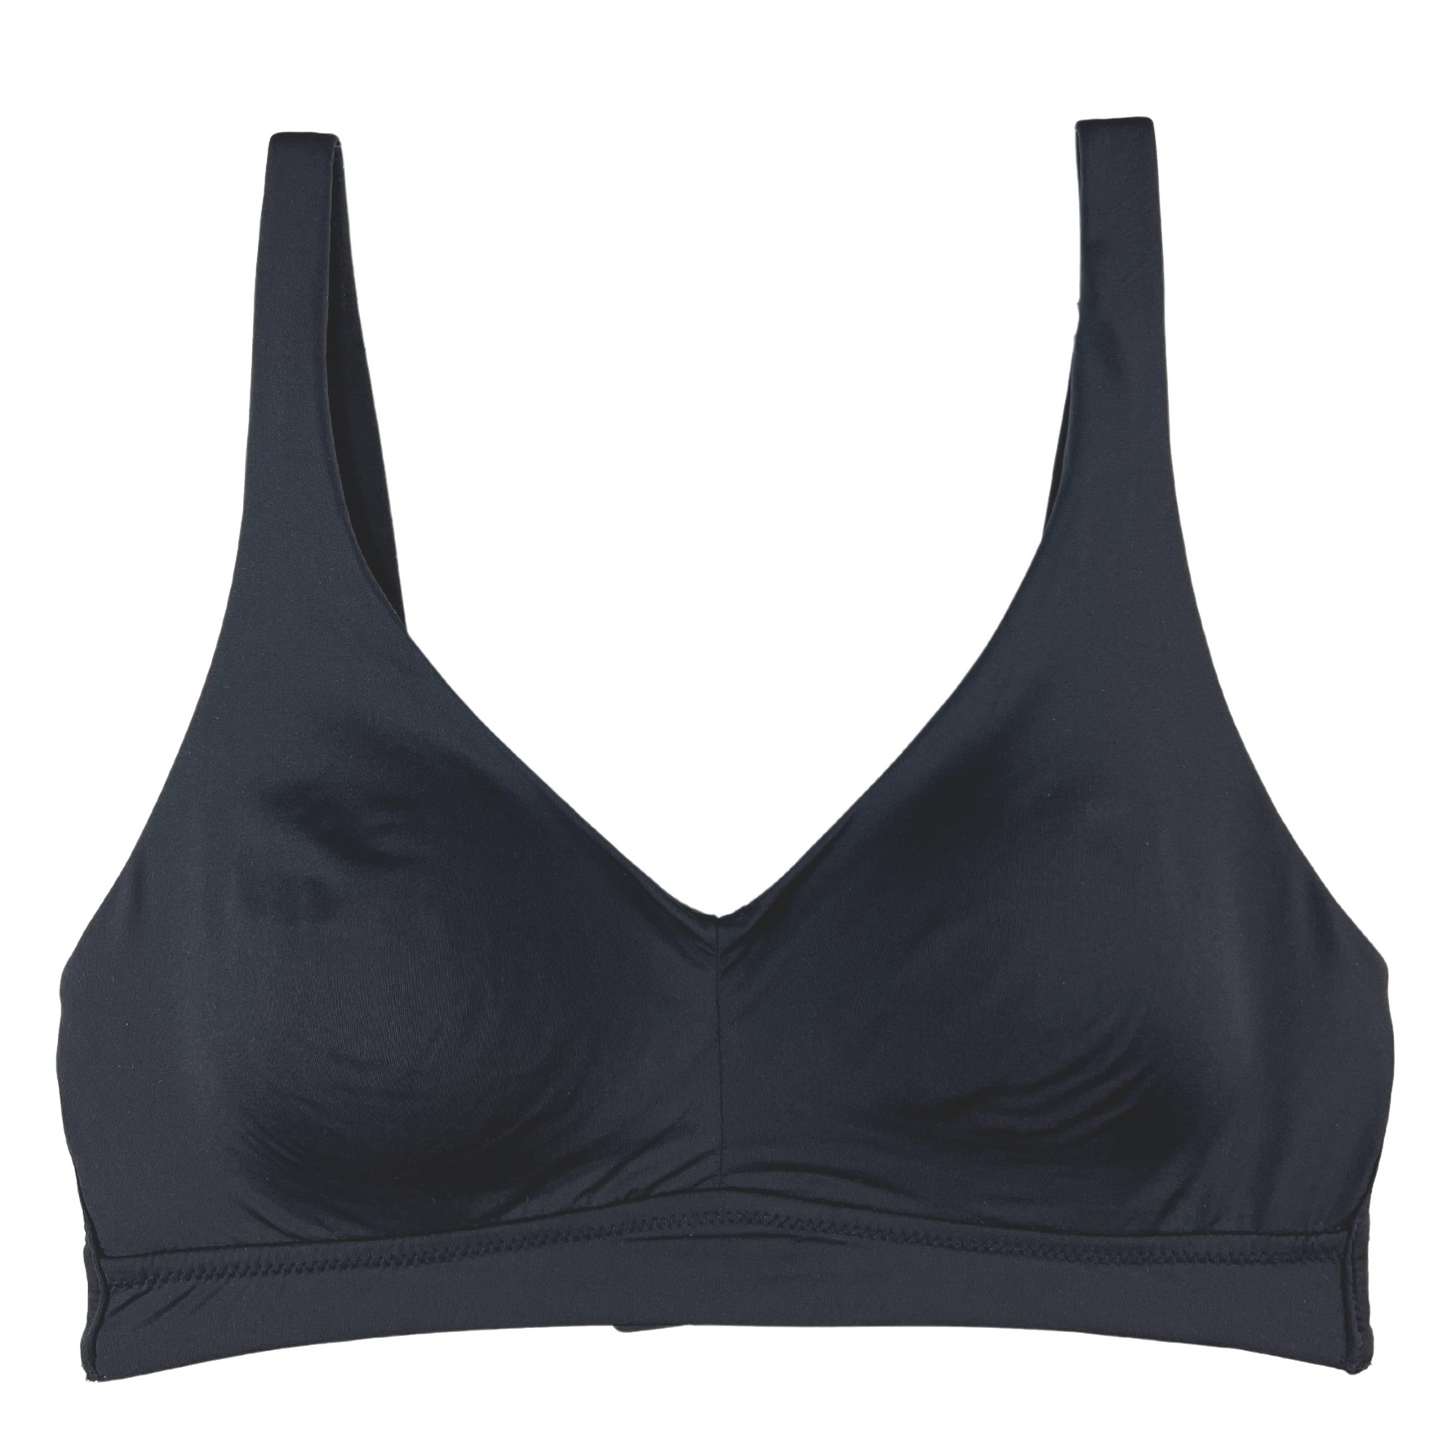 Montelle Cup Sized Bralette – Shapely Hart